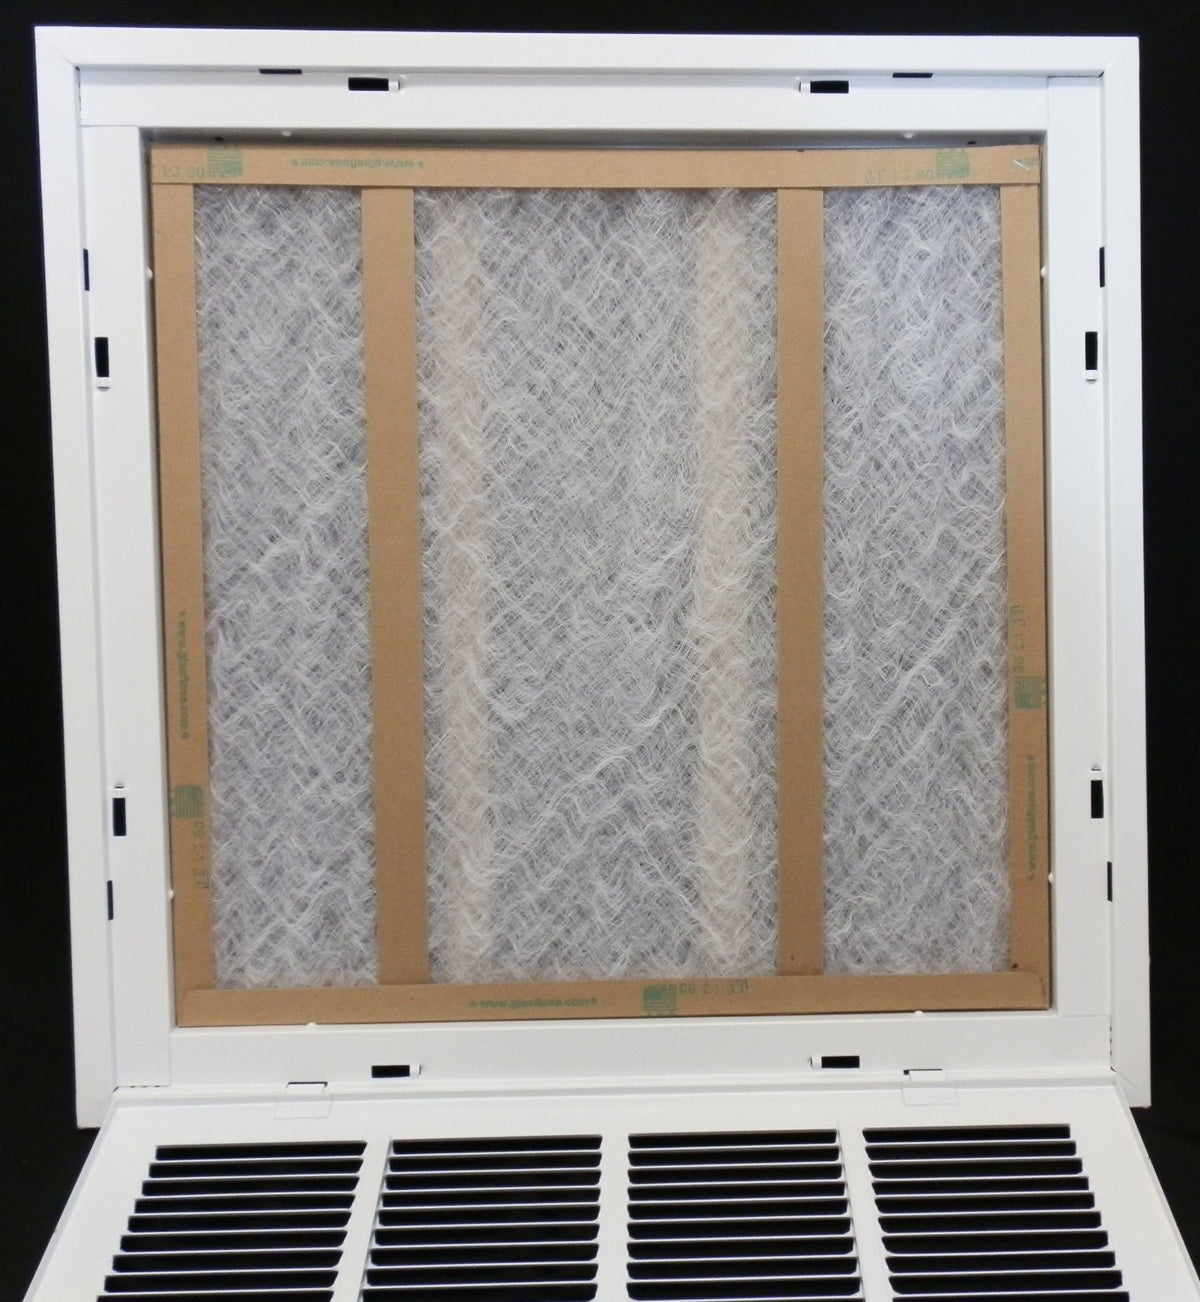 25&quot; X 25&quot; Steel Return Air Filter Grille for 1&quot; Filter - Removable Frame - [Outer Dimensions: 27 5/8&quot; X 27 5/8&quot;]